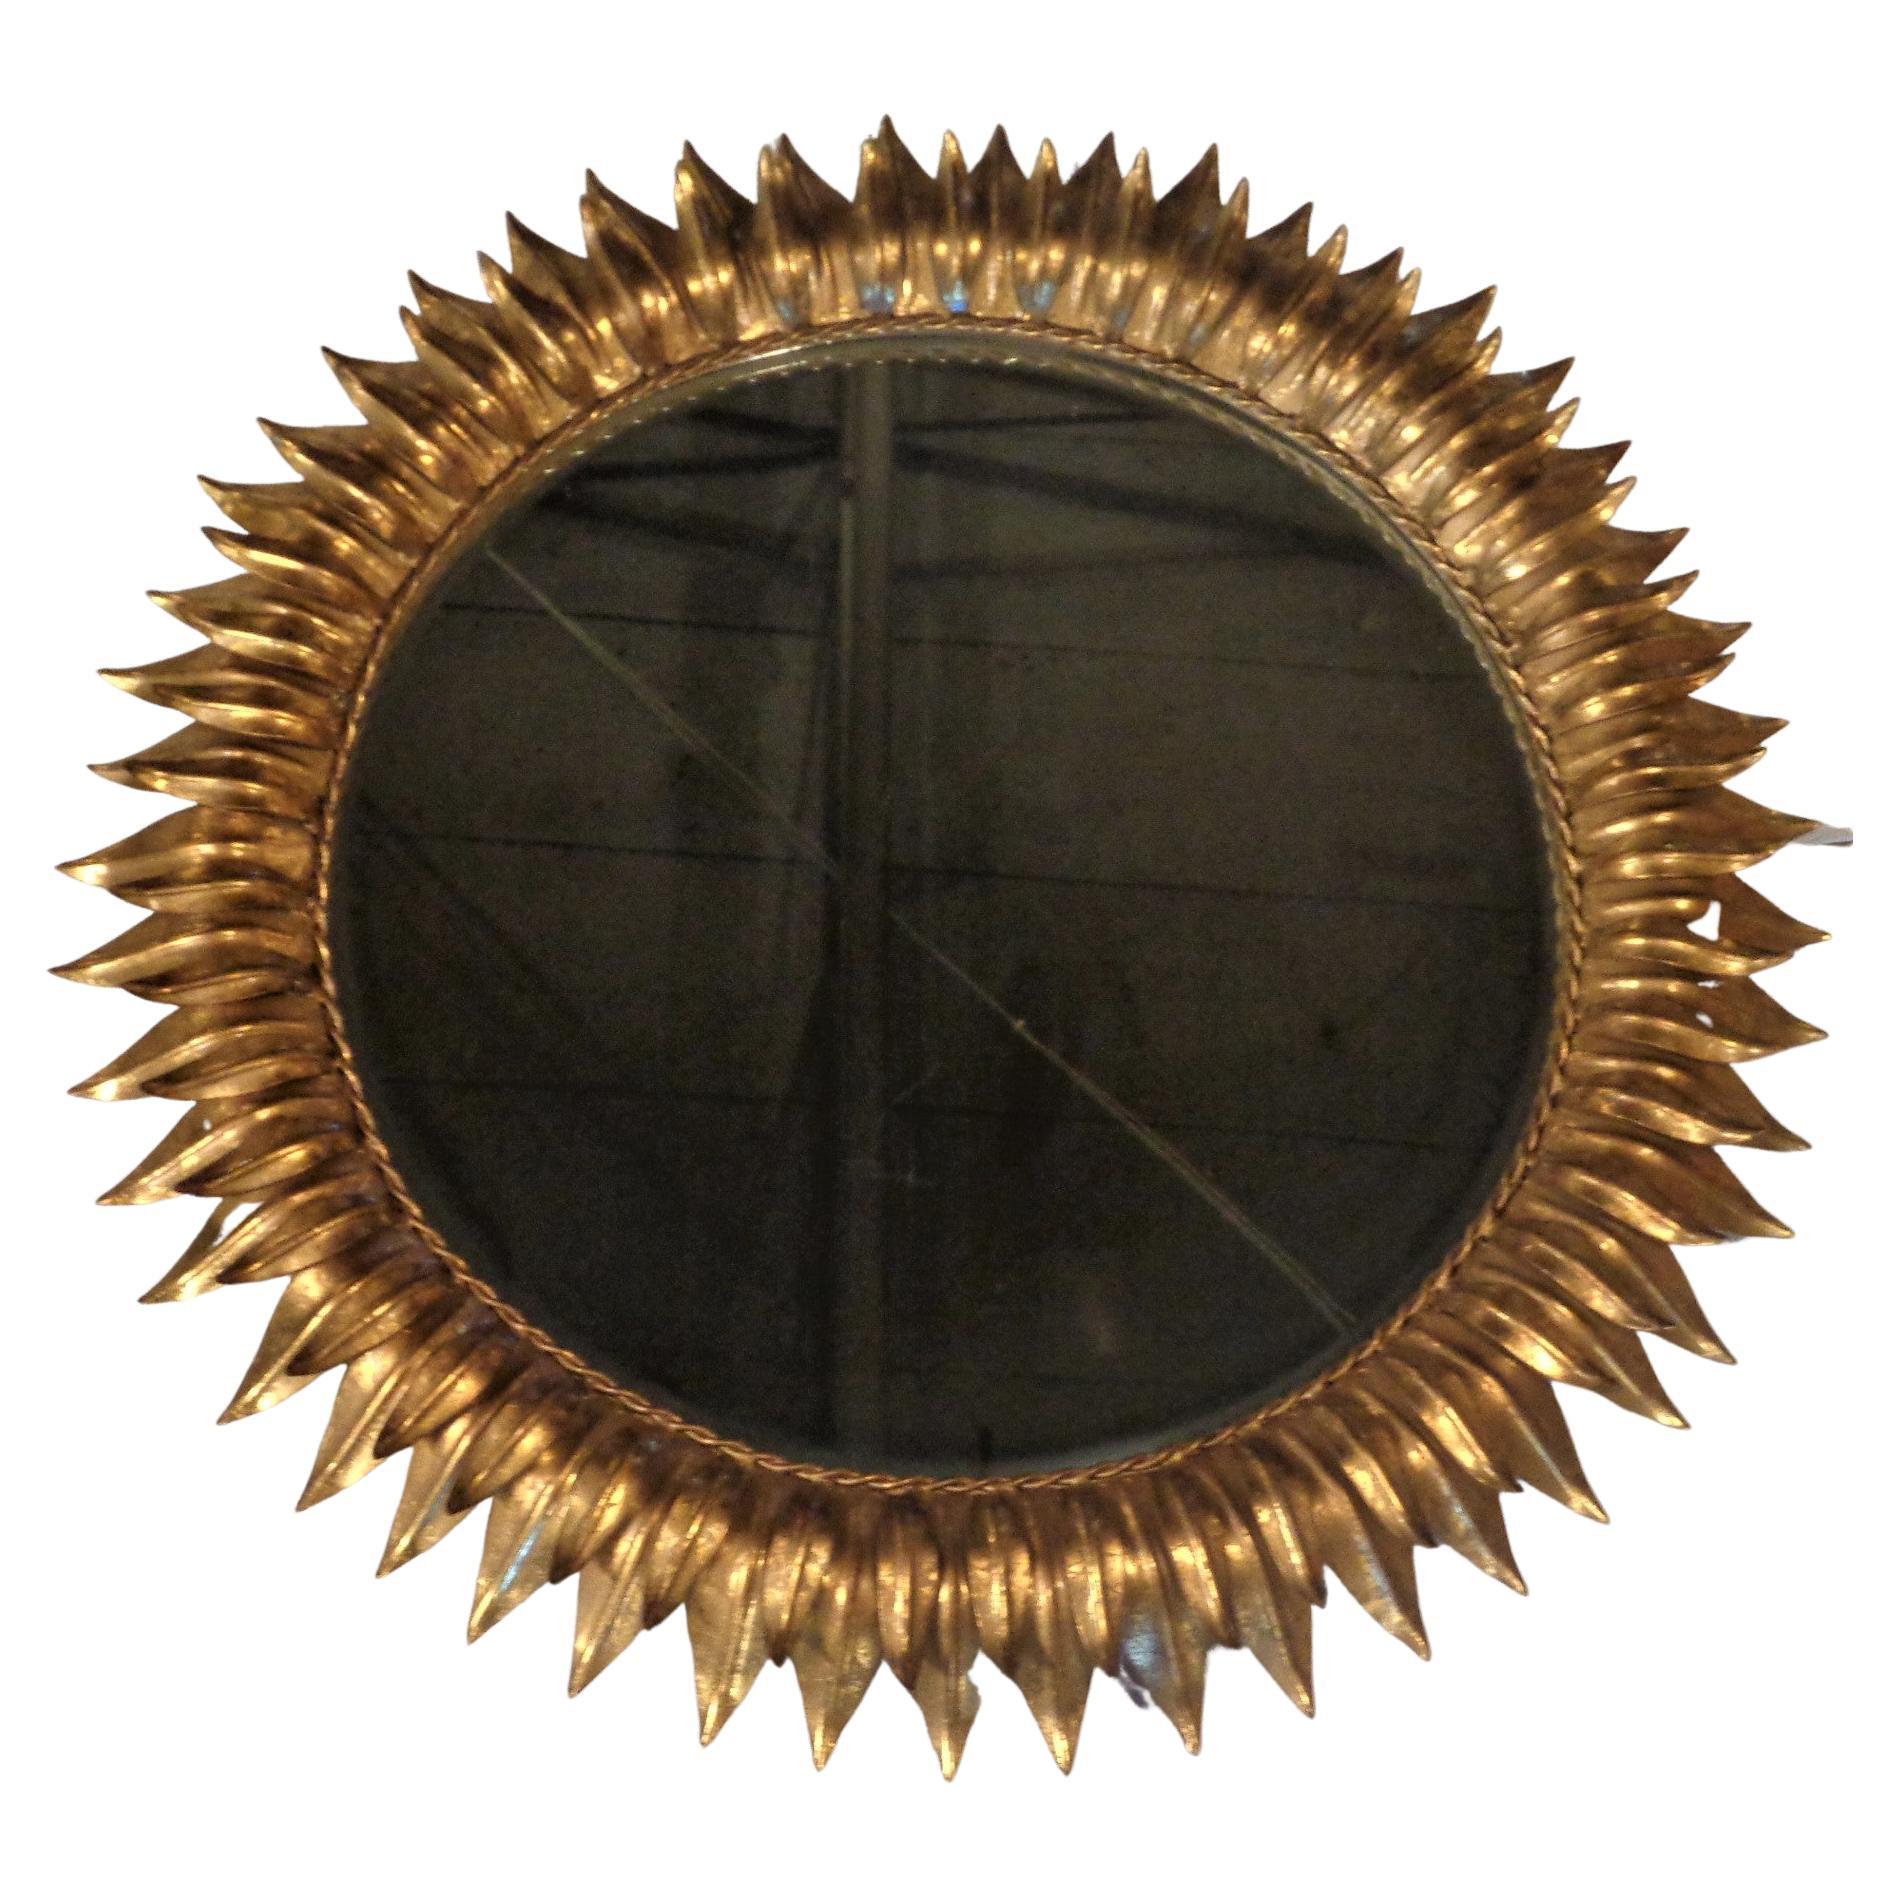 Spanish style round gilt metal sunburst mirror. Framework w/ two layers of curved leaves. Interior beveled plate glass mirror. Overall beautiful original bright gilded gold leaf surface. Mirror frame measures 28